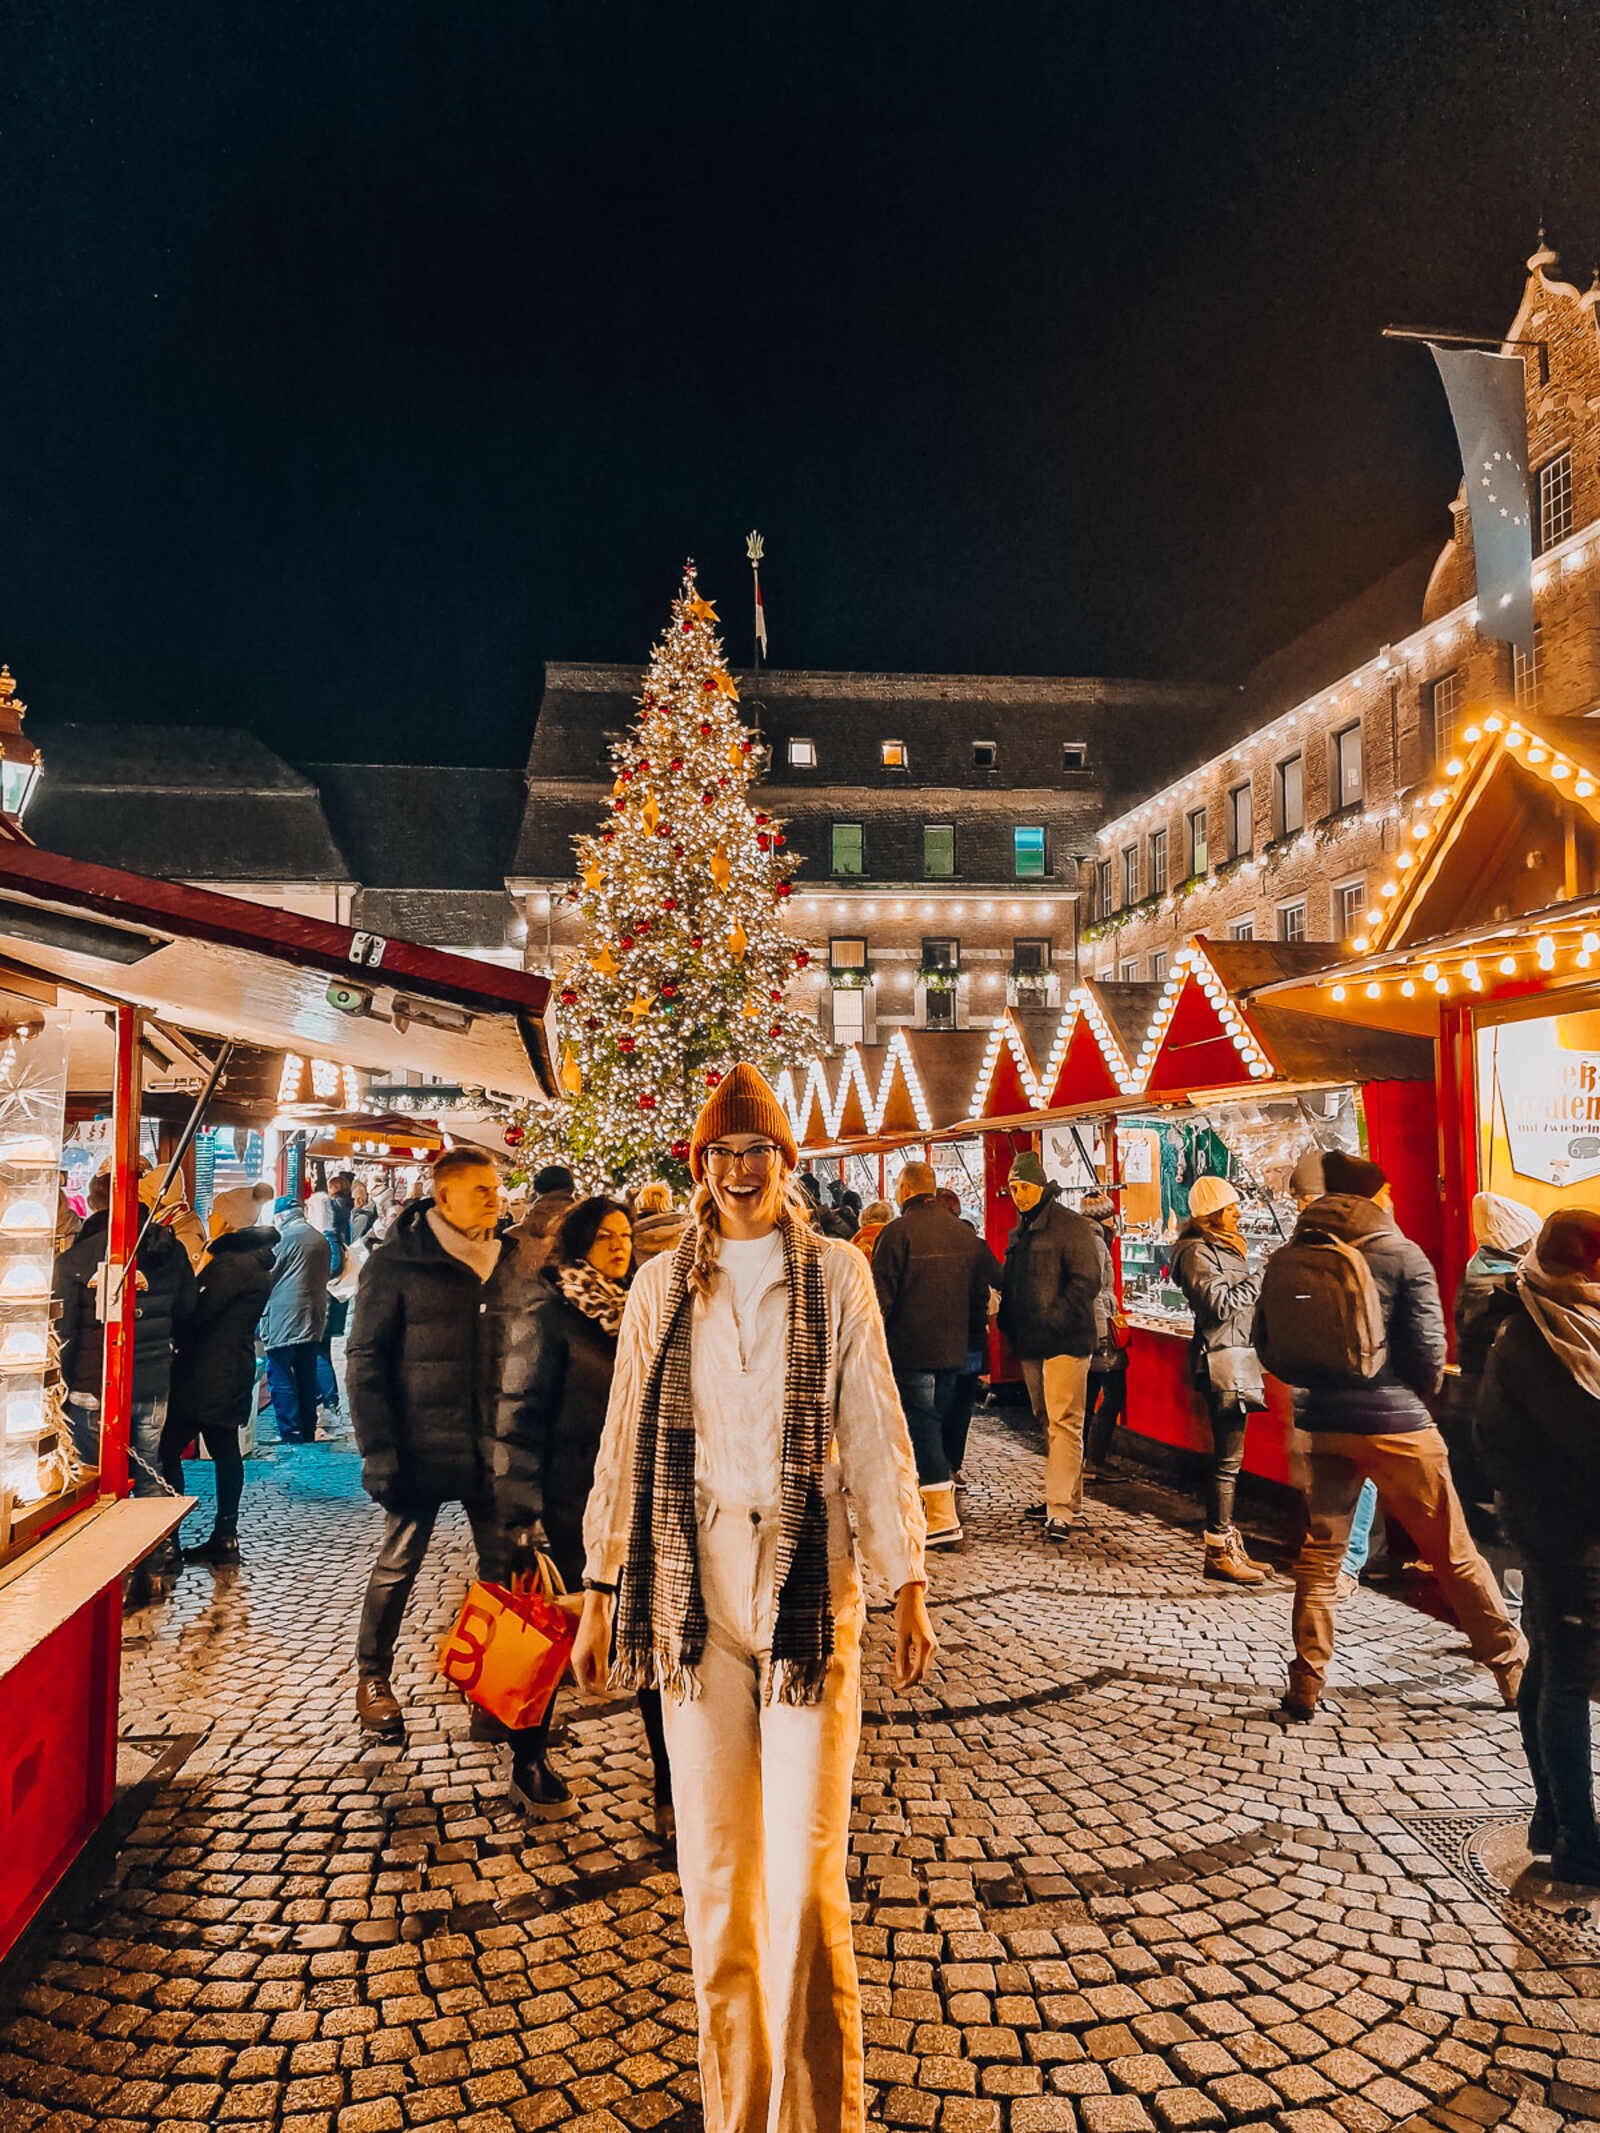 A girl in white standing at the Christmas market